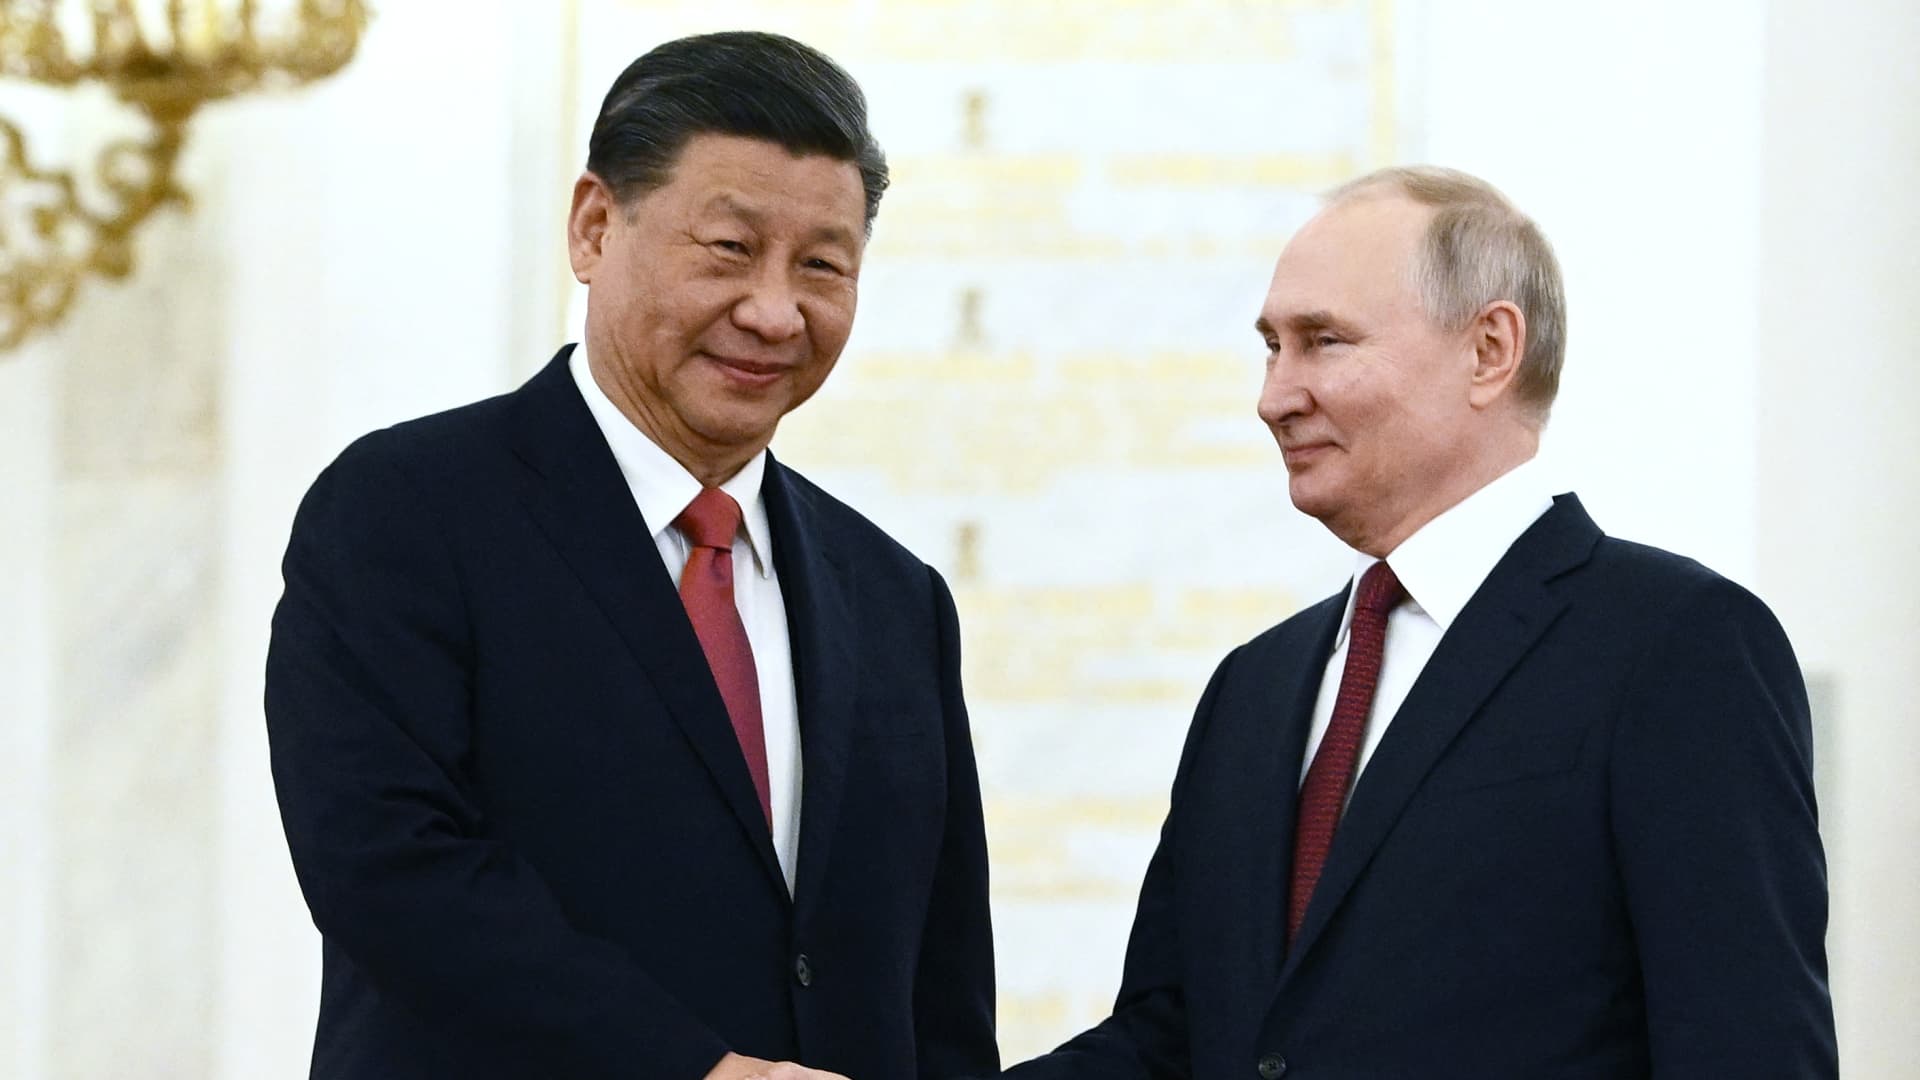 Russian President Vladimir Putin meets with China's President Xi Jinping at the Kremlin in Moscow on March 21, 2023.